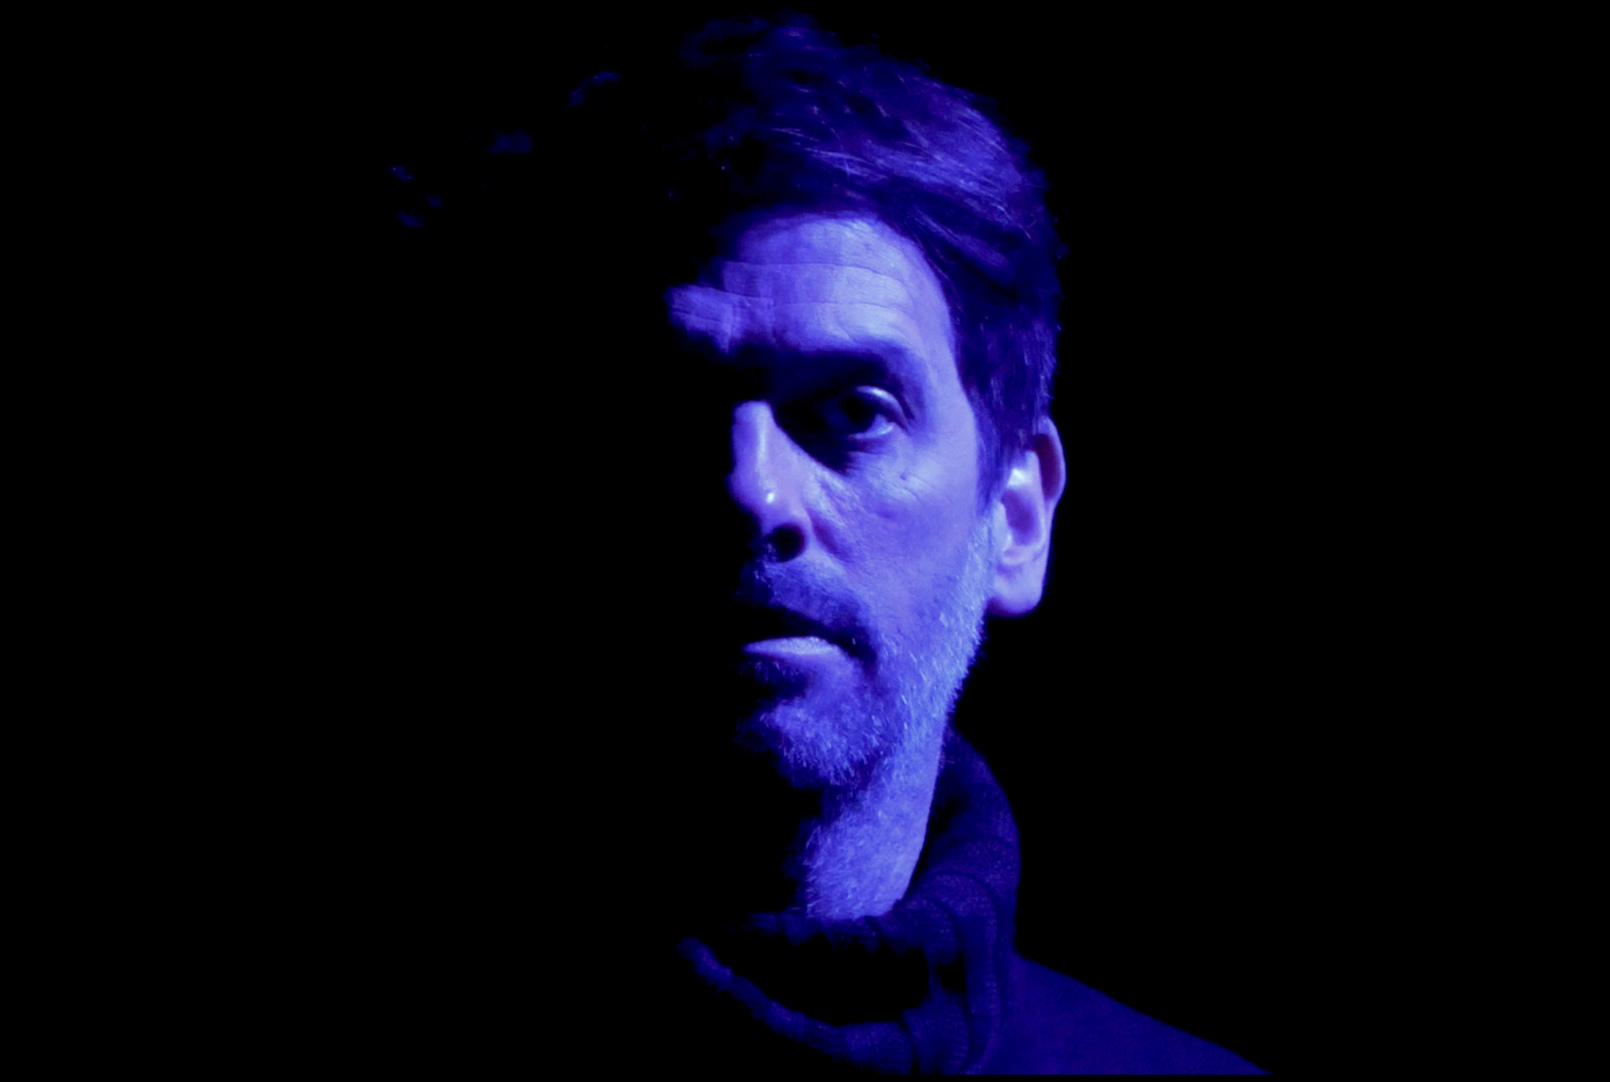 A head view of a man looking serious, dimly lit with blue light against black background.